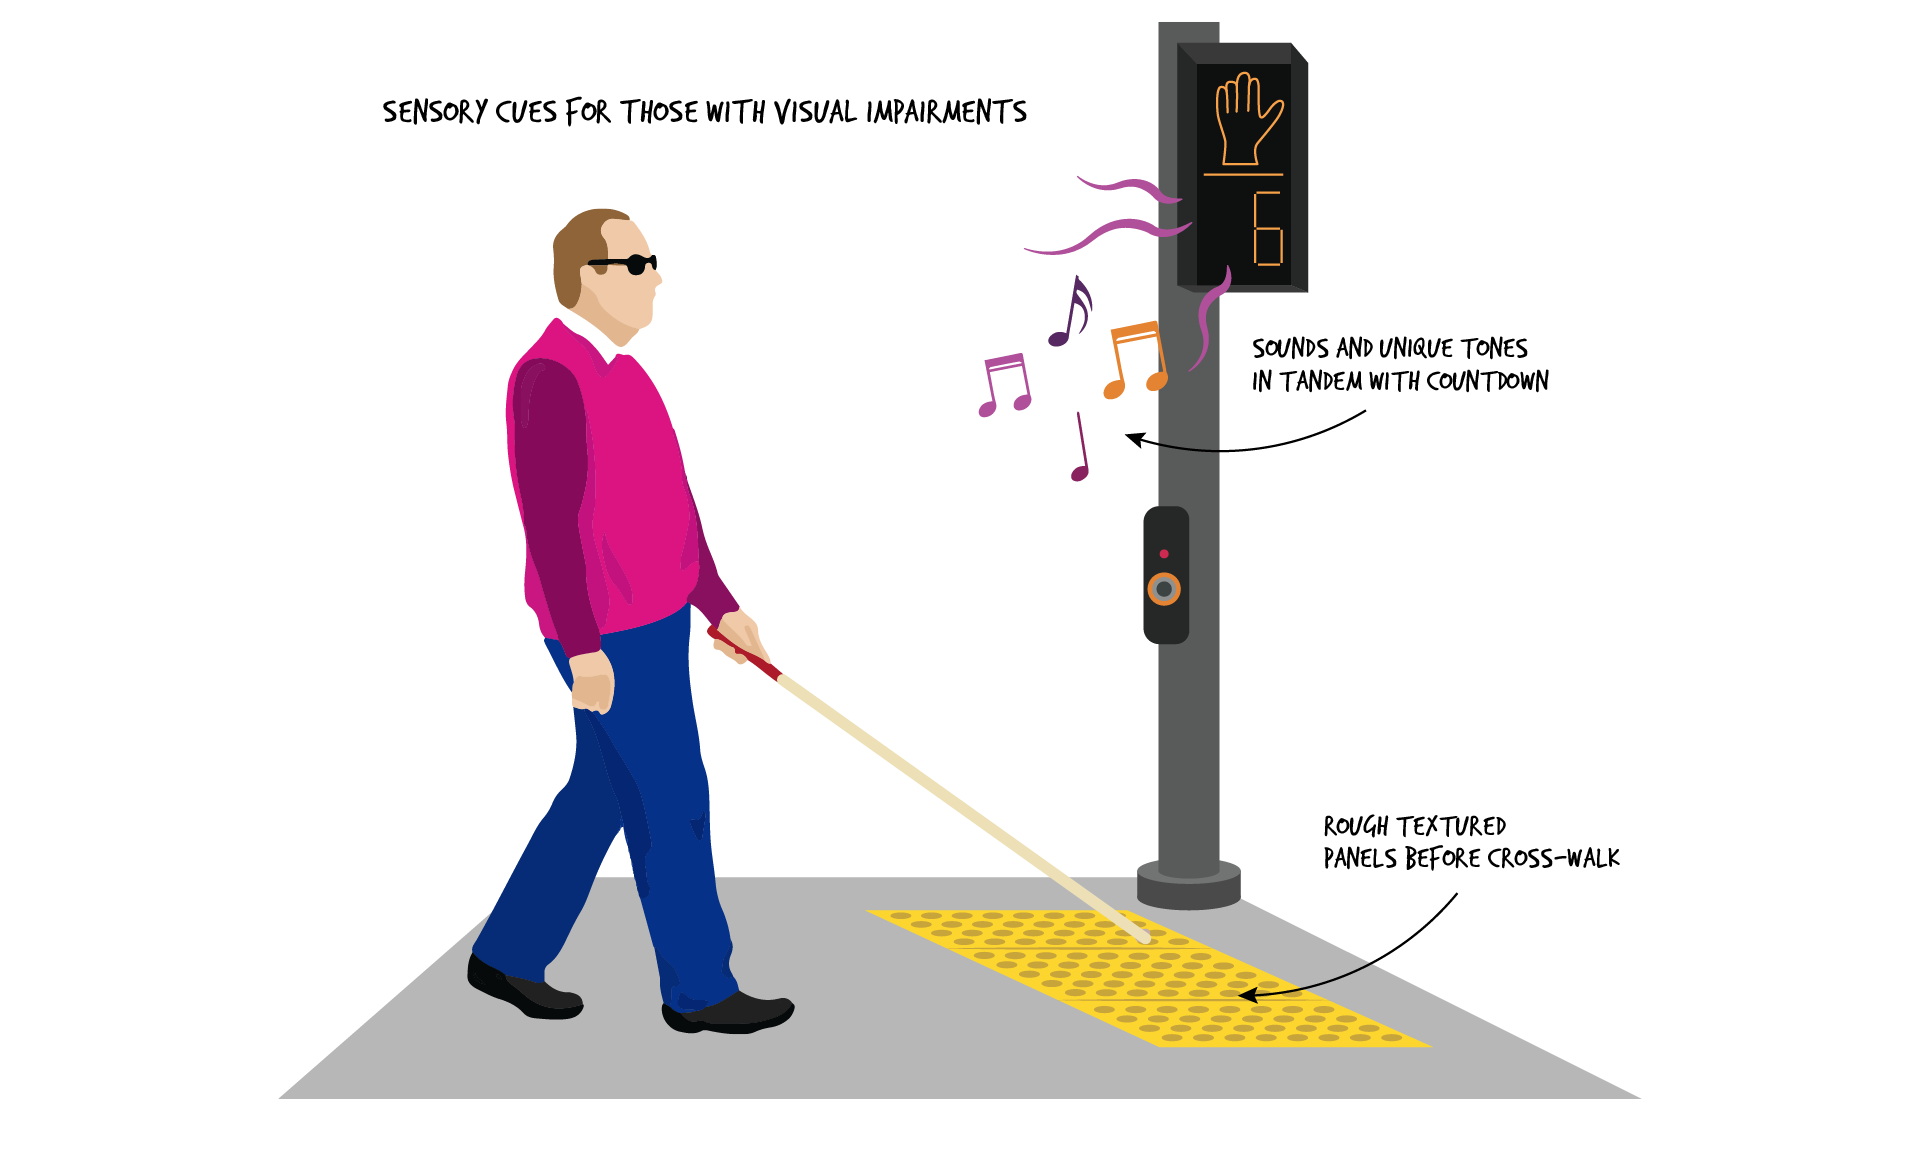 The title is Sensory Cues for those with Visual Impairments. A visually-impaired person is walking towards a crosswalk in a pink sweater, blue pants, and black glasses. They are holding a cane. Before the cross-walk is a yellow base with a bumpy texture and the text: Rough textured panels before cross-walk. A black pole with a cross-walk signal shows an orange hand and 6, indicating the time remaining to cross. Musical notes and squiggly lines are placed around the signal with the text: Sounds and unique tones in tandem with countdown.